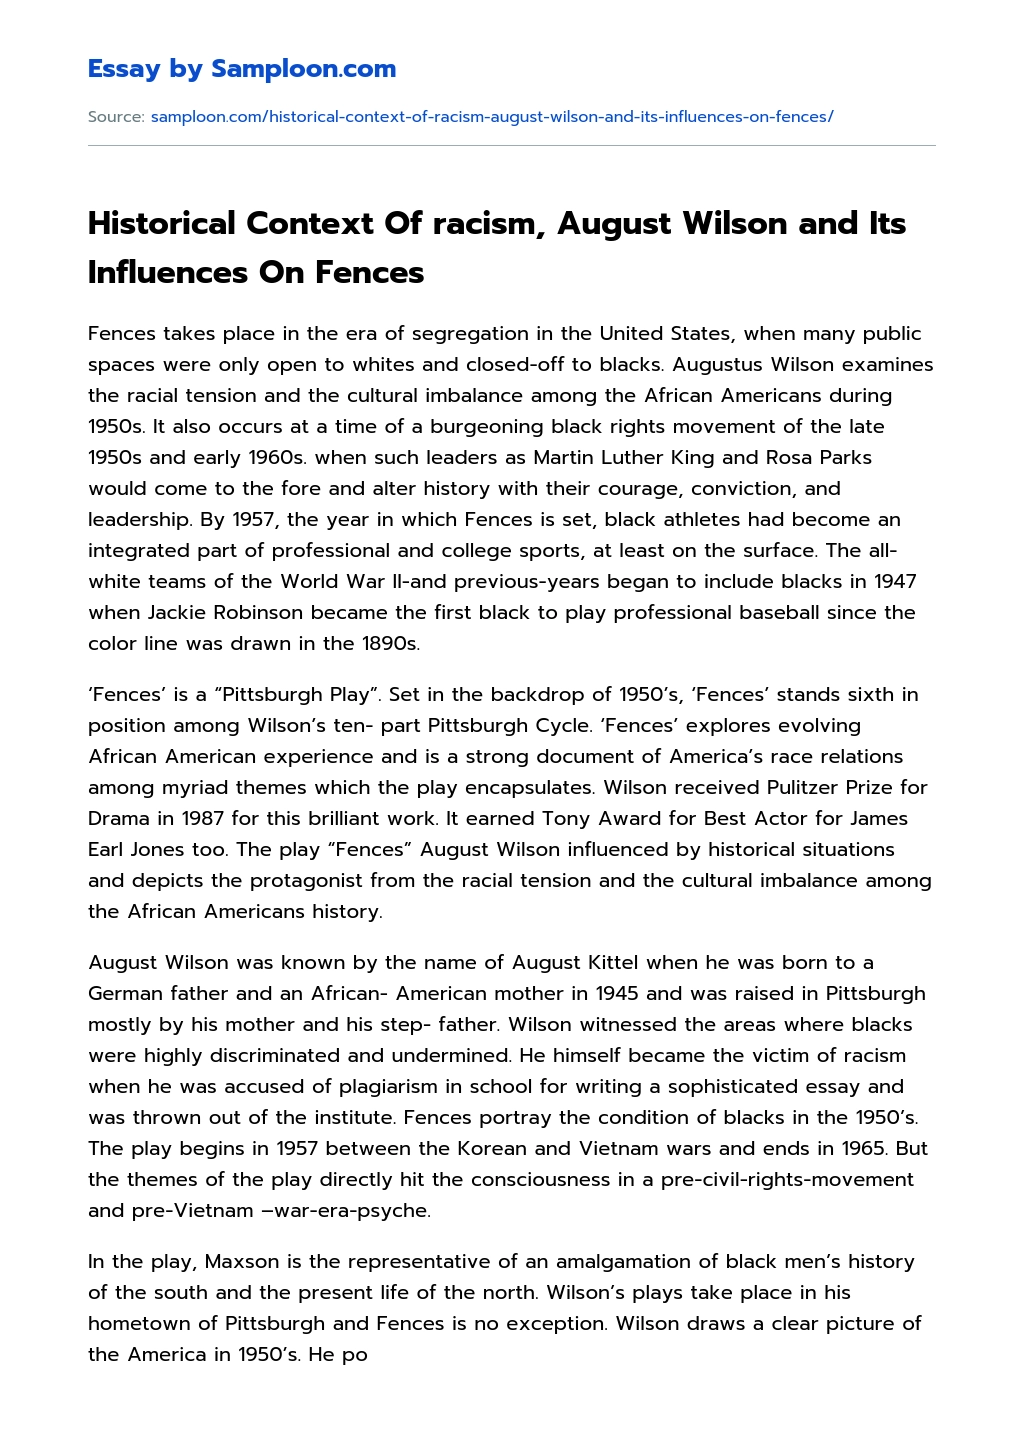 Historical Context Of racism, August Wilson and Its Influences On Fences Analytical Essay essay